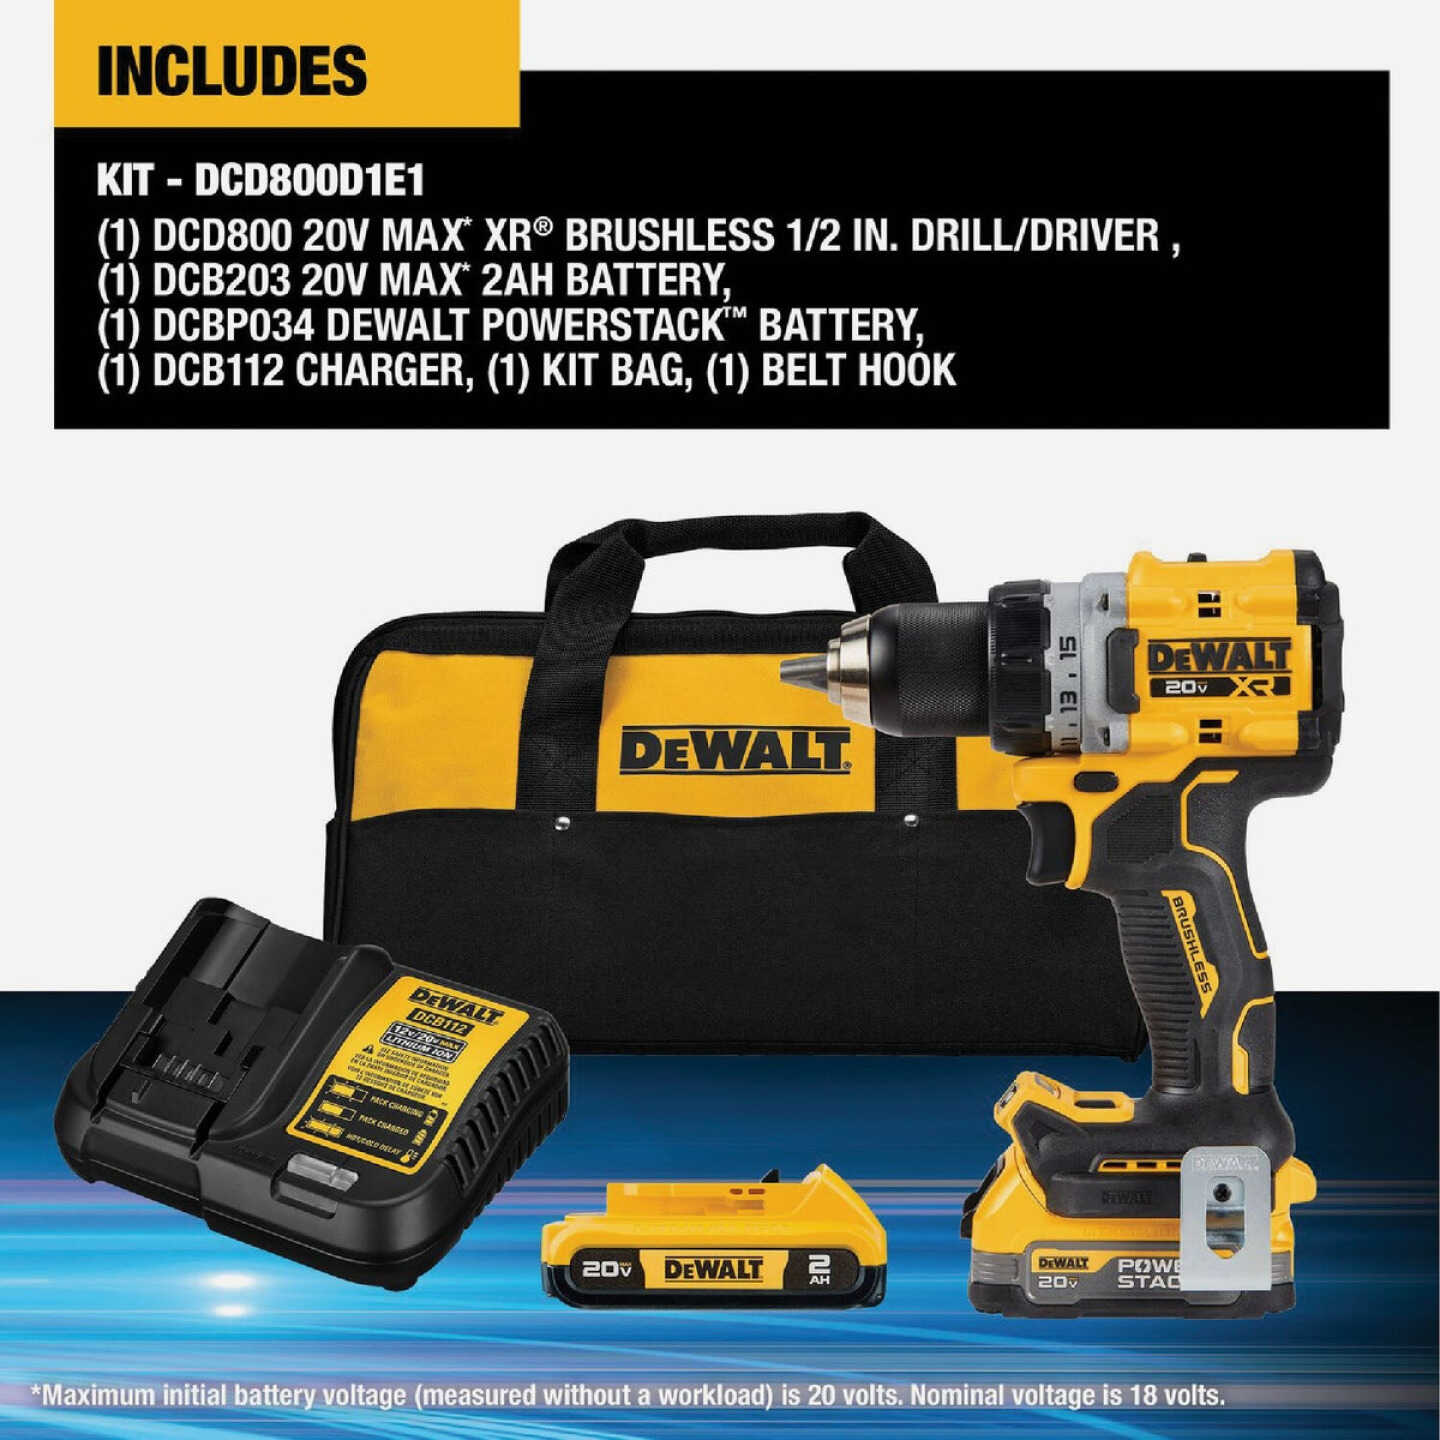 DEWALT 20V MAX XR Brushless 1/2 In. Compact Drill/Driver Kit with 1.7 Ah  POWERSTACK Battery & 2.0 Ah Battery & Charger - Bliffert Lumber and Hardware